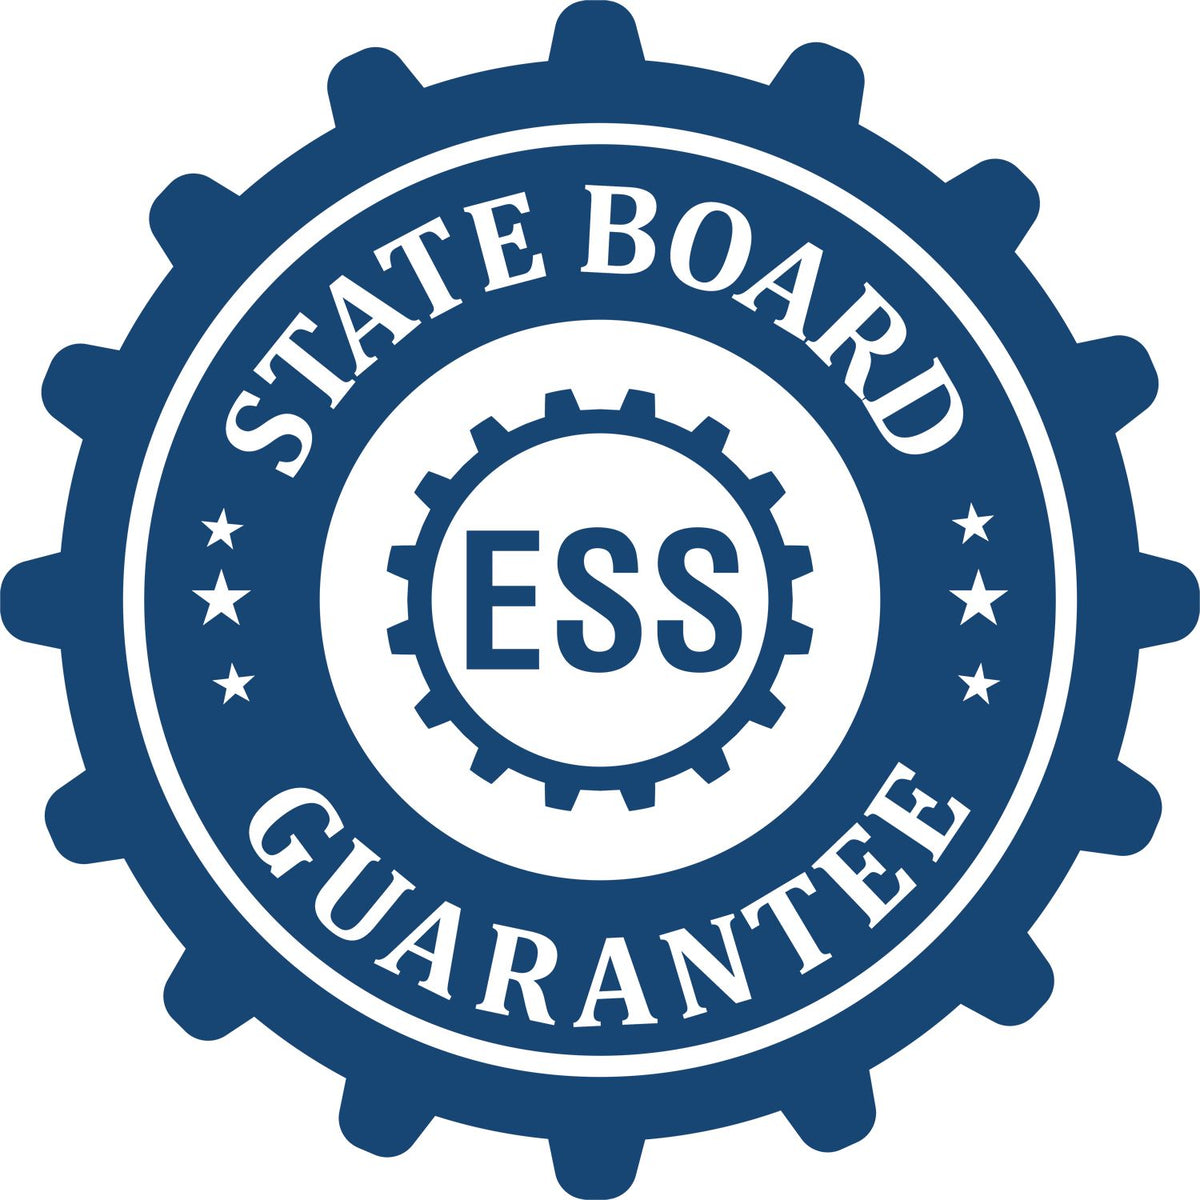 An emblem in a gear shape illustrating a state board guarantee for the Premium MaxLight Pre-Inked North Carolina Engineering Stamp product.